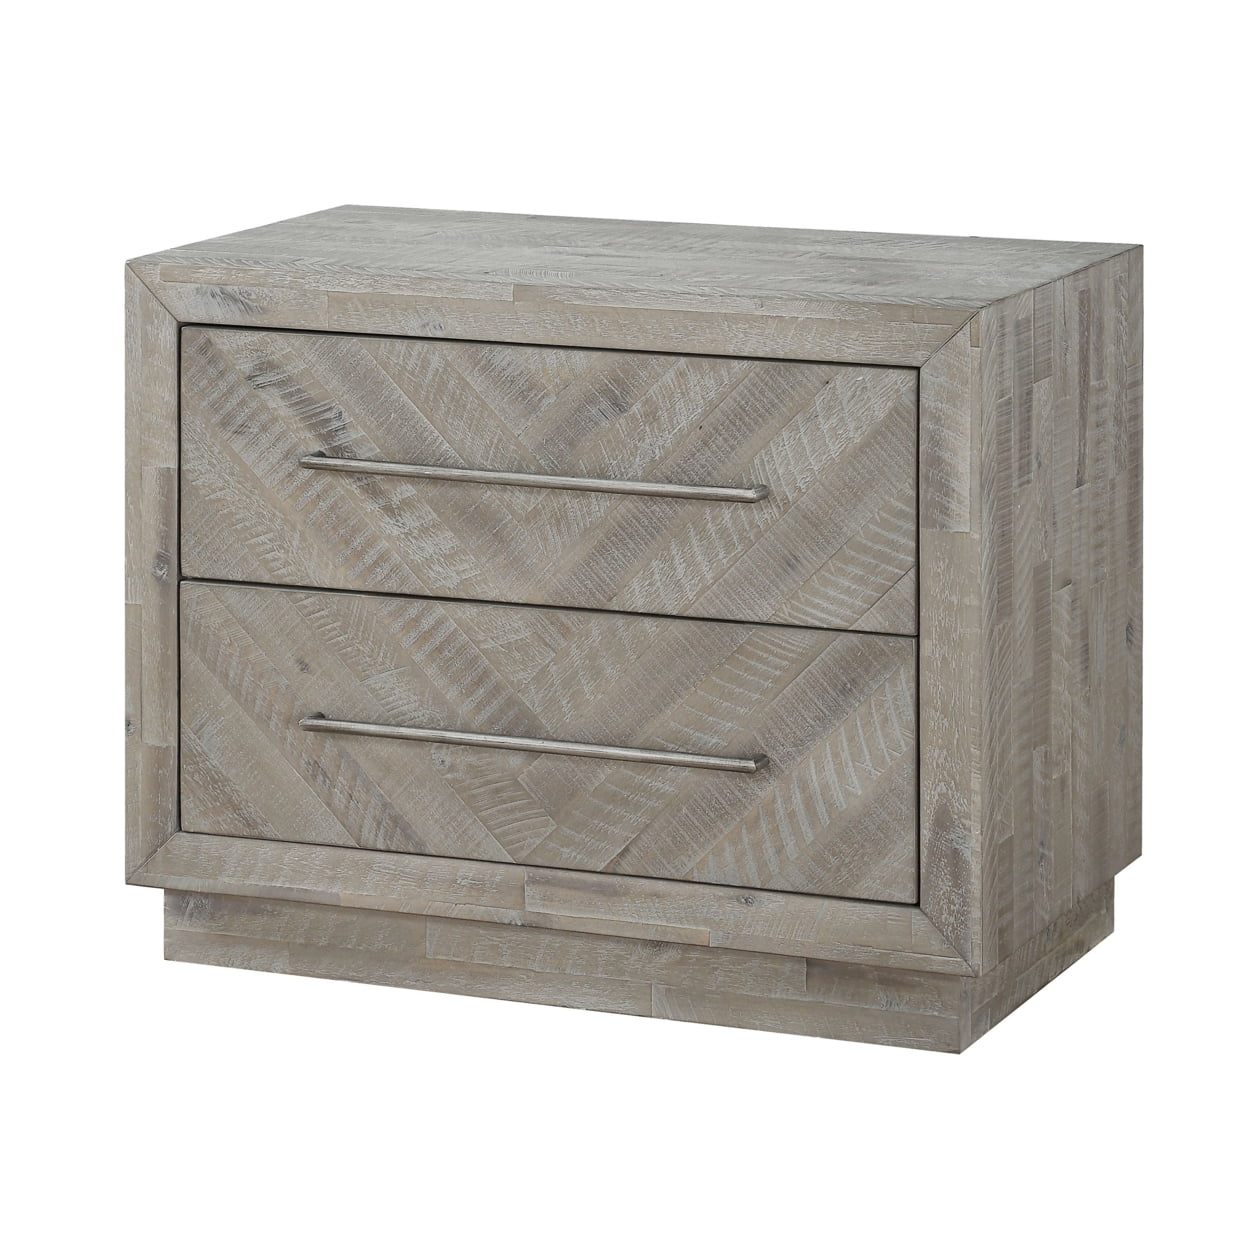 Picture of Benjara BM206671 Wooden Nightstand with Herringbone Pattern & 2 Drawers - Weathered Brown - 24 x 30 x 17 in.